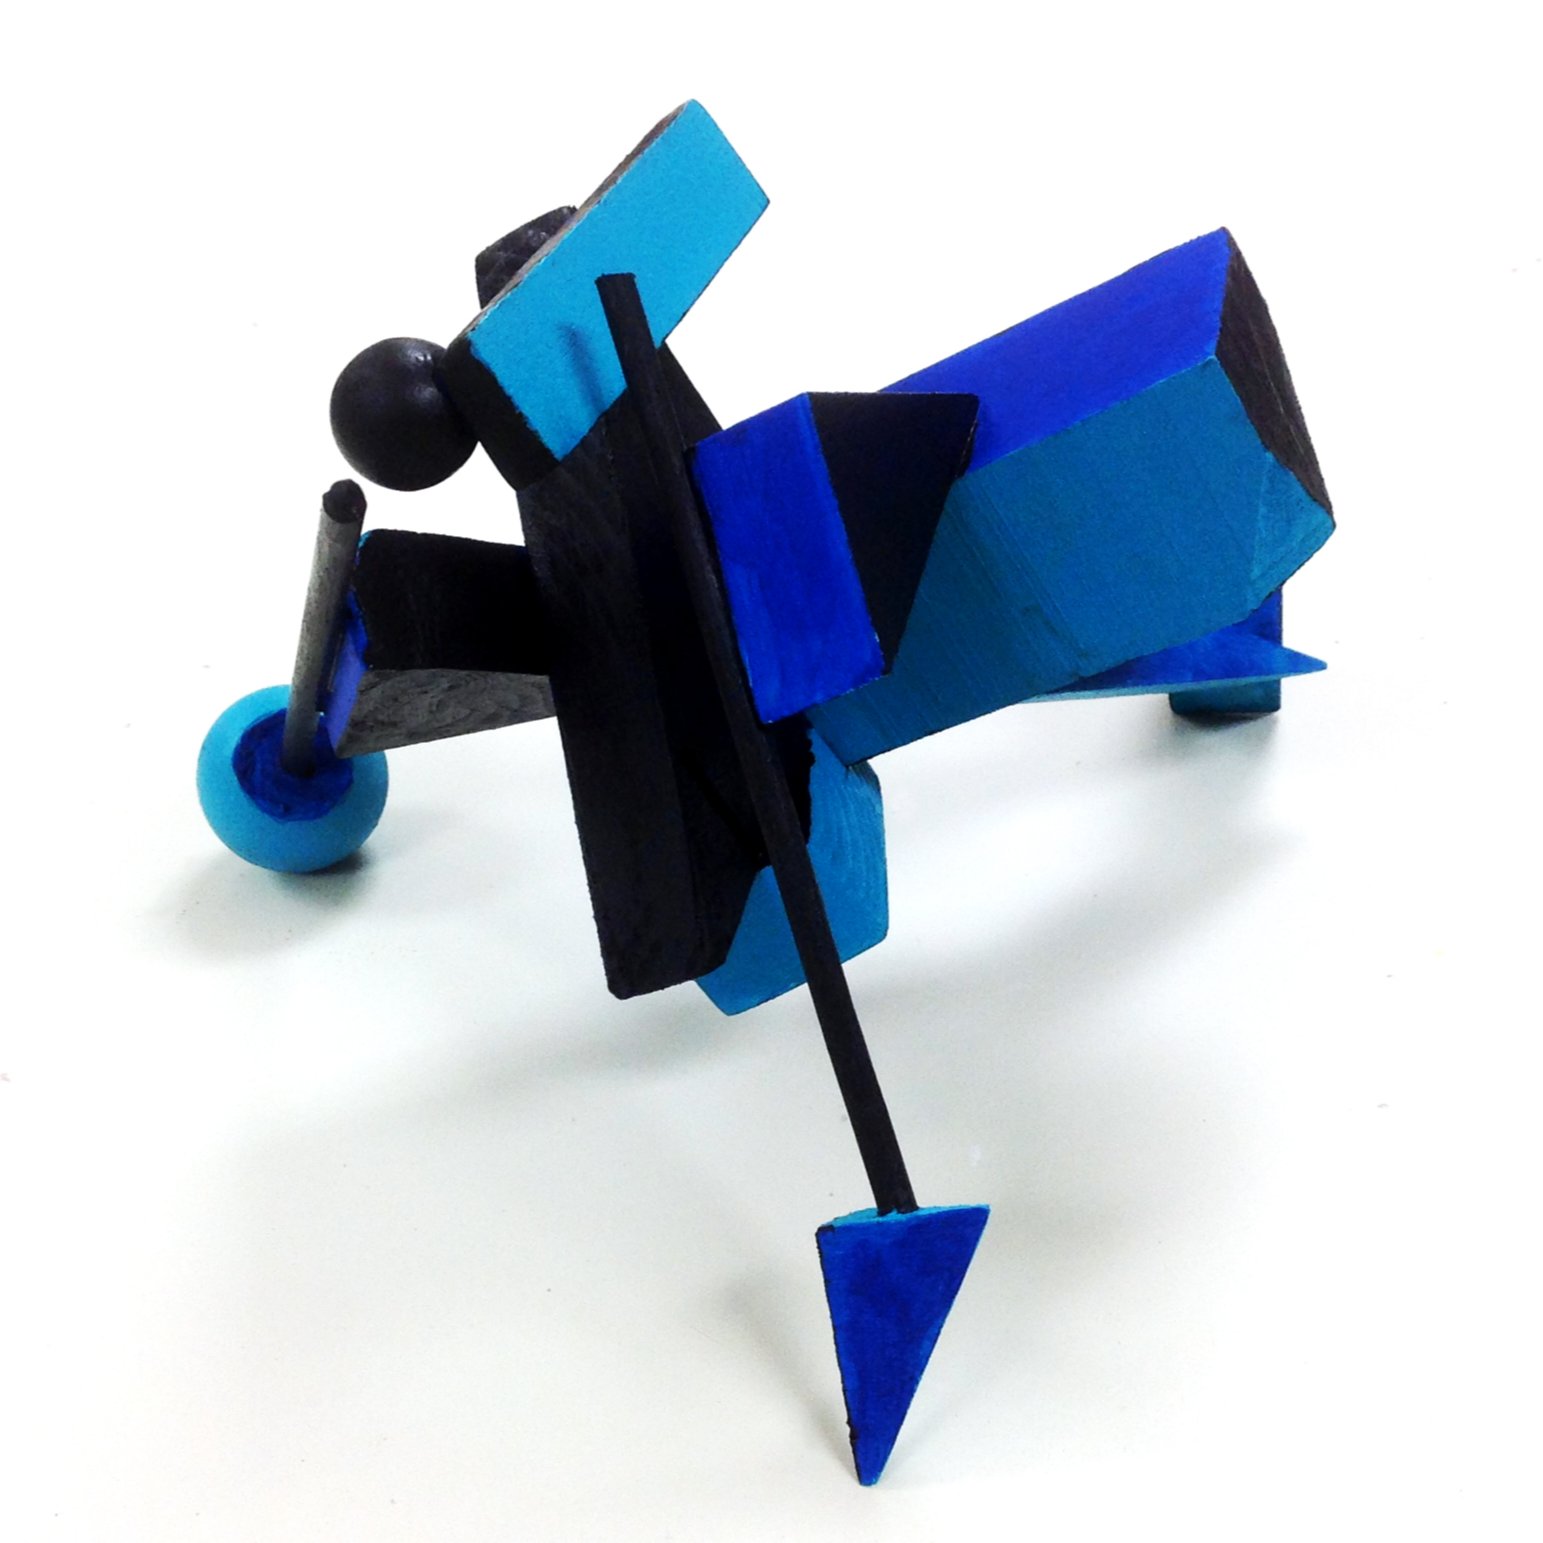 abstract sculpture made of blue and black wooden shapes